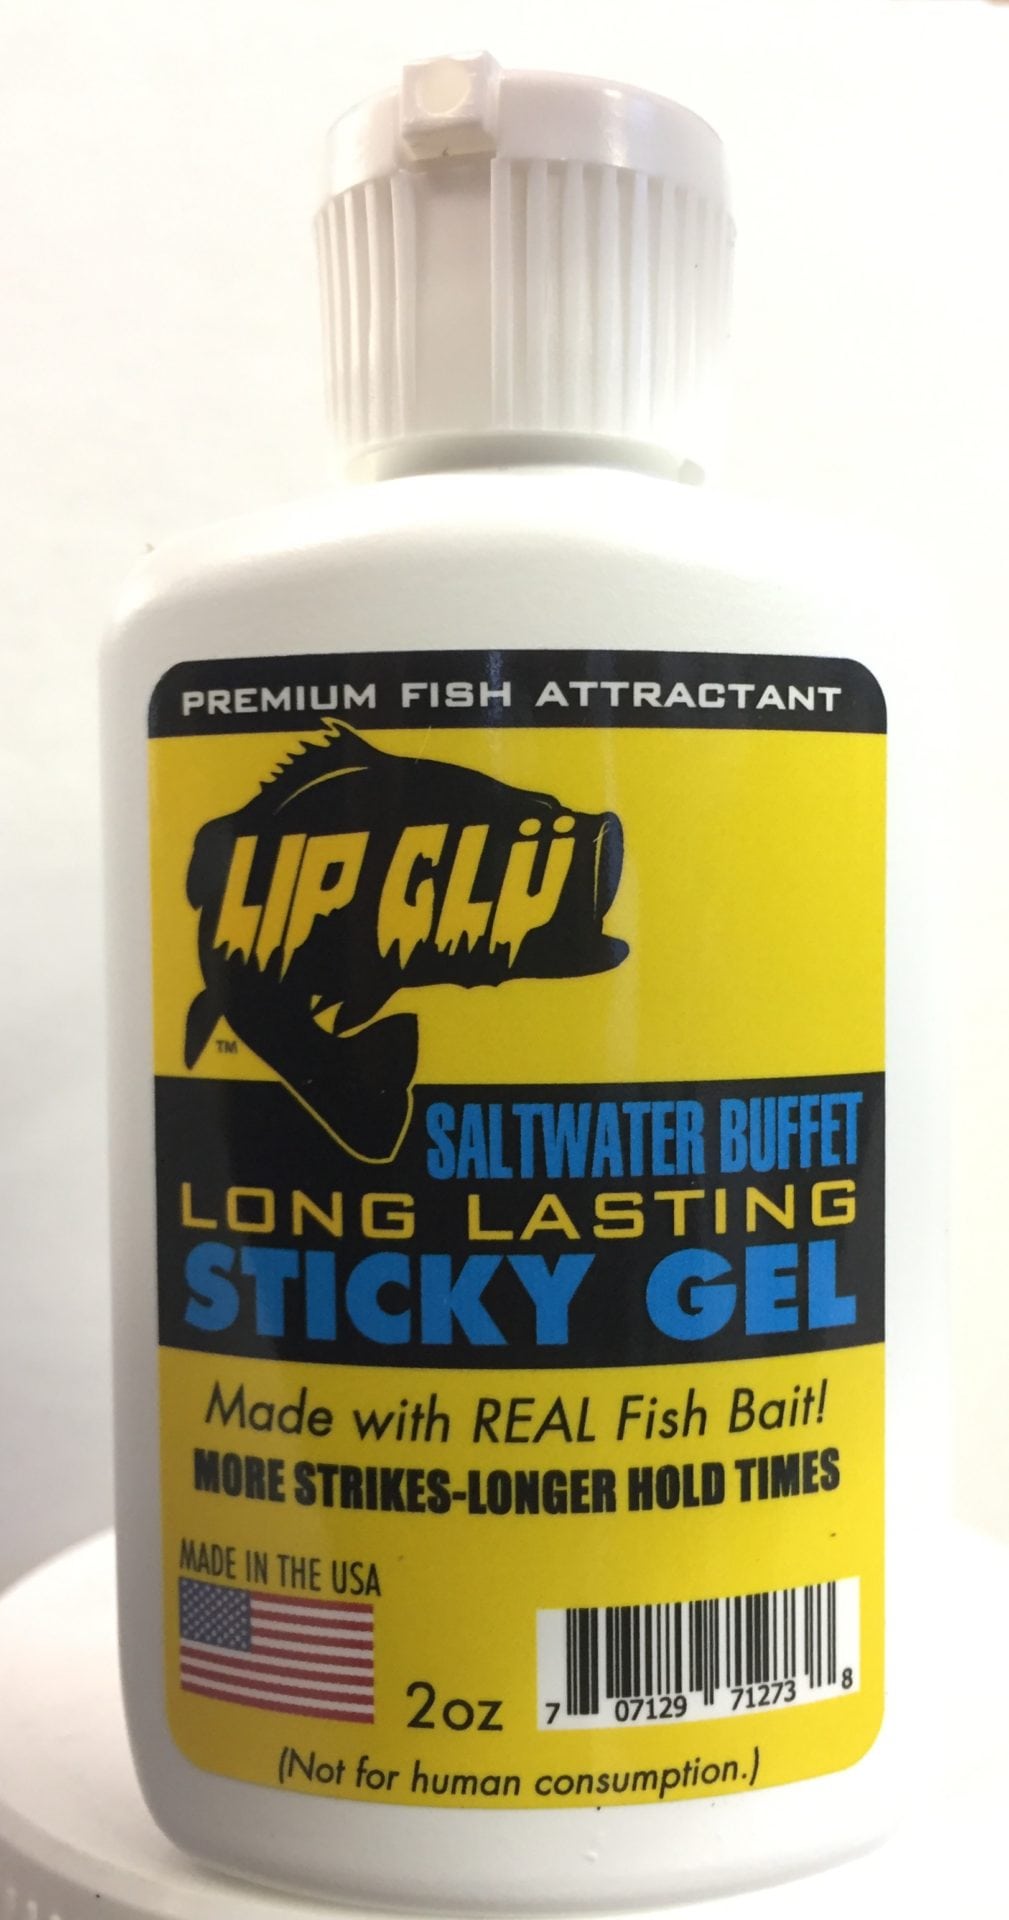 A bottle of sticky gel for fishing